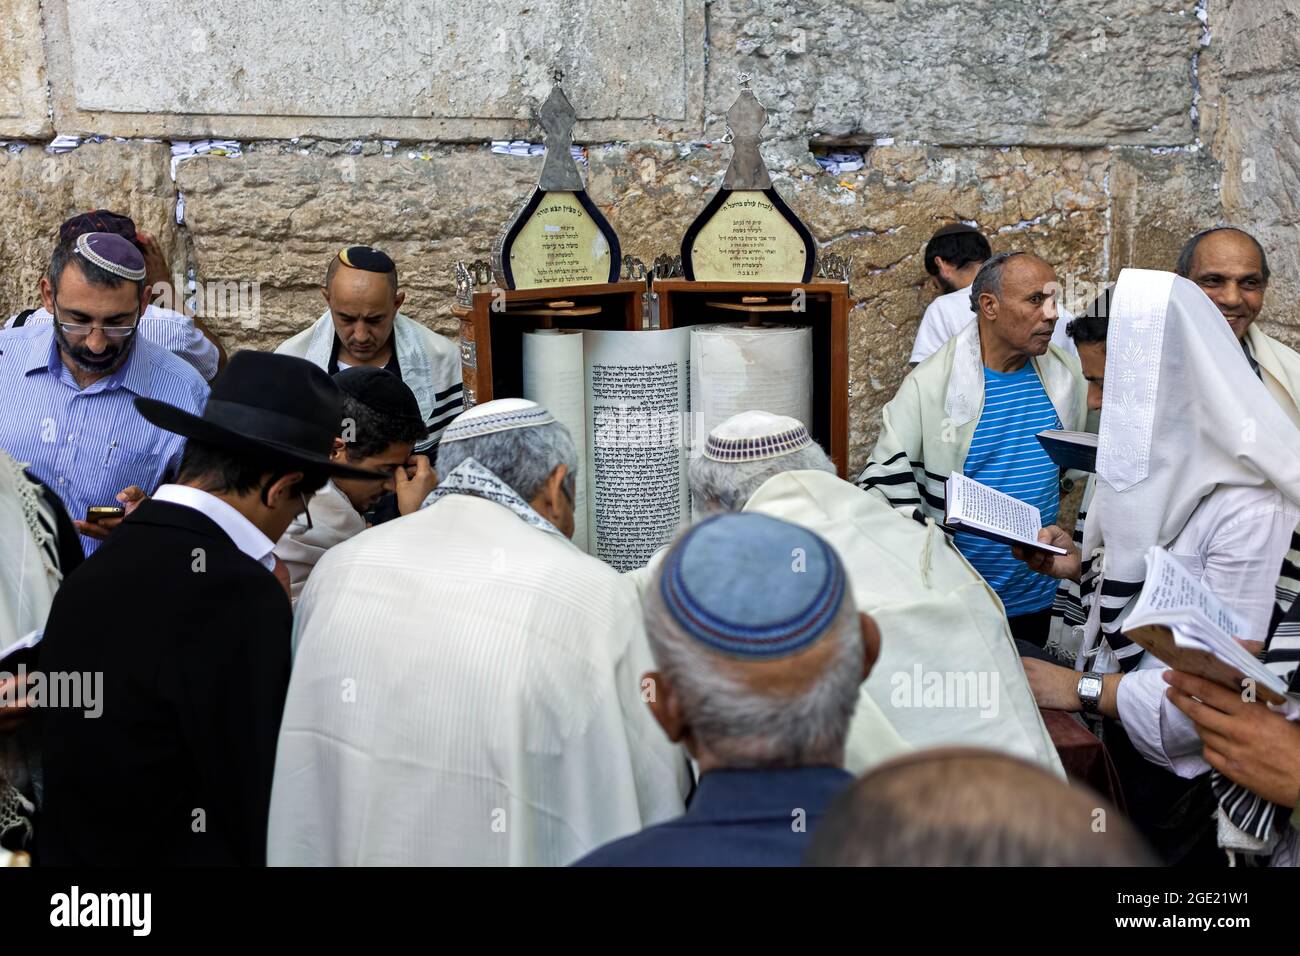 A group of religious Jews praying with a Torah scroll at the Wailing Wall commemorating Tisha B'Av - an annual fast day in Judaism. Stock Photo